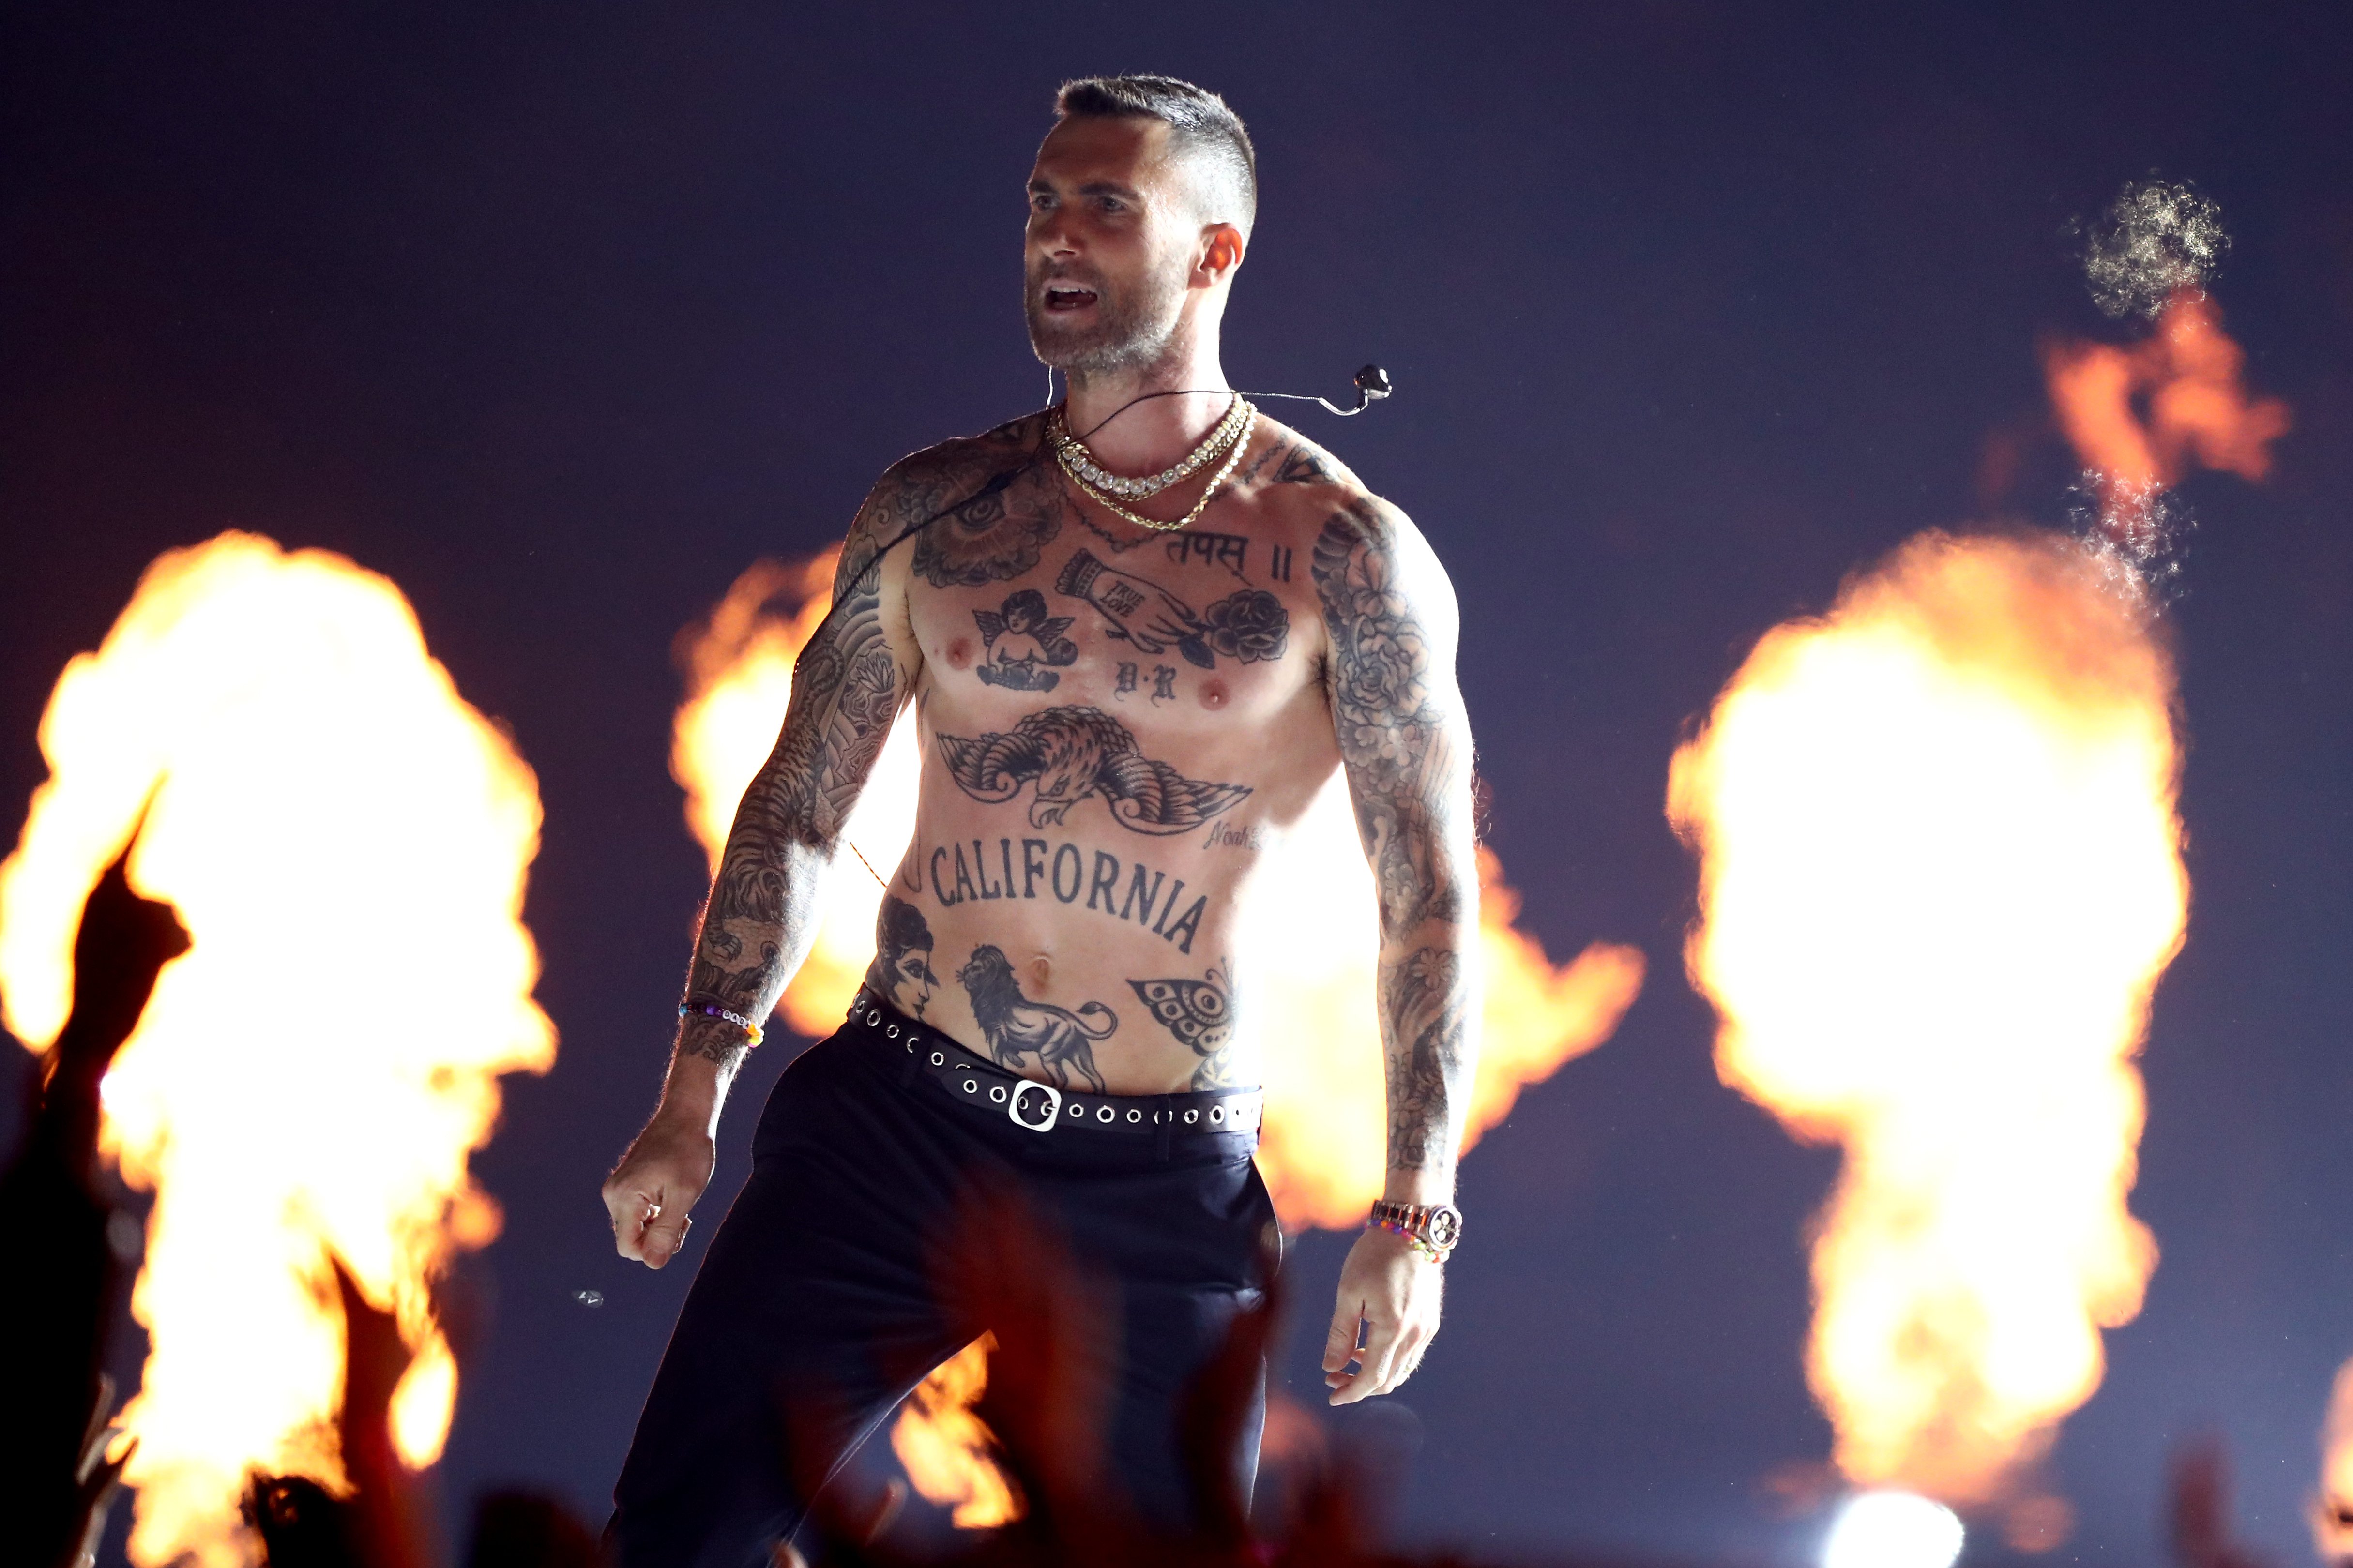 Adam Levine performs during the Pepsi Super Bowl LIII Halftime Show at Mercedes-Benz Stadium on February 03, 2019 in Atlanta, Georgia | Photo: Getty Images